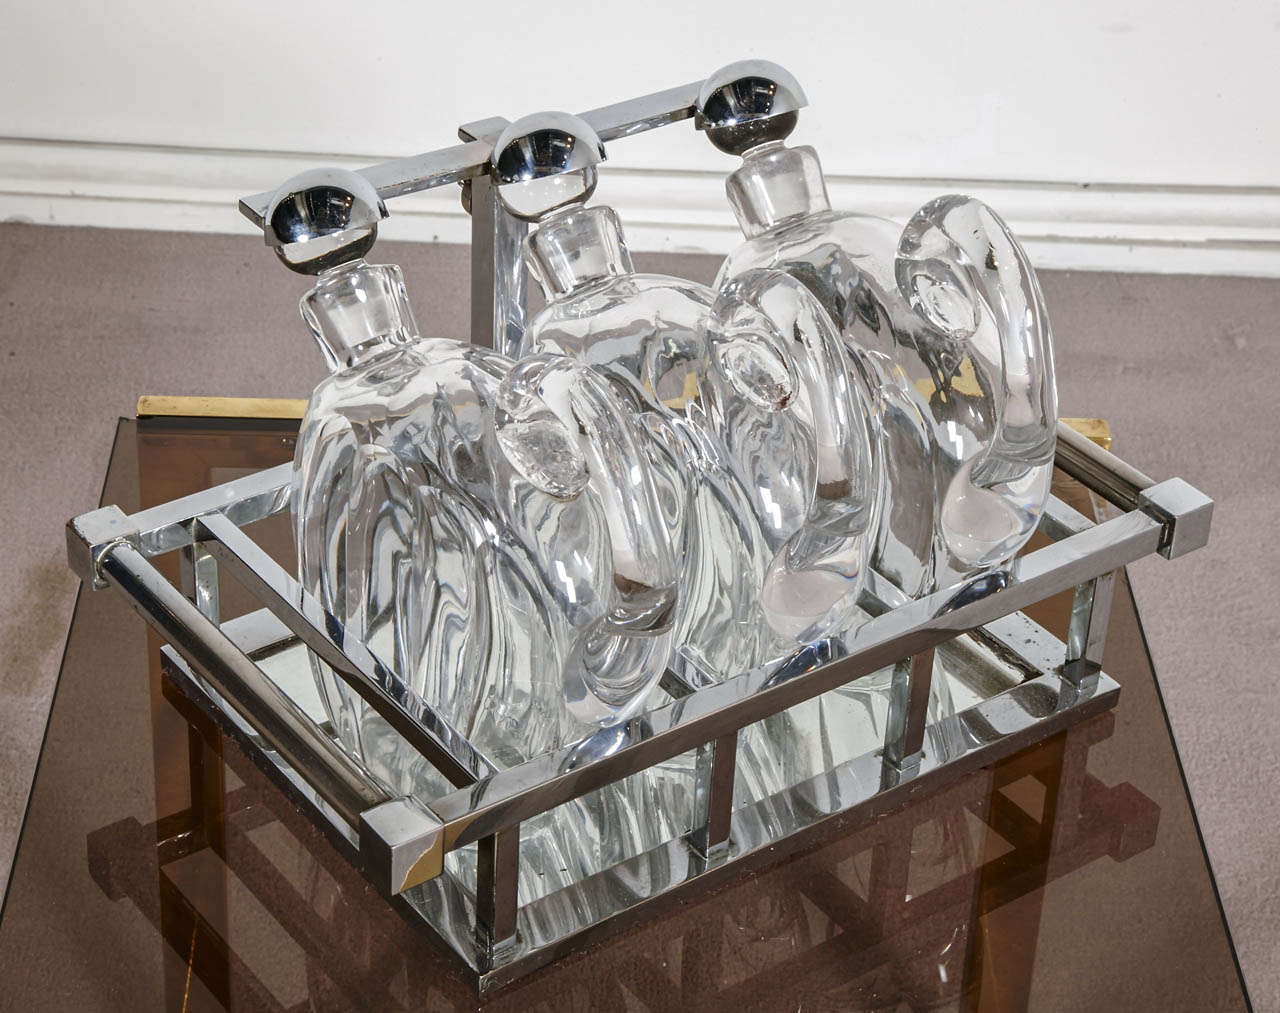 Liqueur cabinet including a tray in the style of Jacques Adnet with three cristal jugs signed Baccarat.

Similar model in the book 'Jacques Adnet' by Alain Rene Hardy and Gaelle Millet. Editions de l'Amateur, Paris 2009, page N°226.